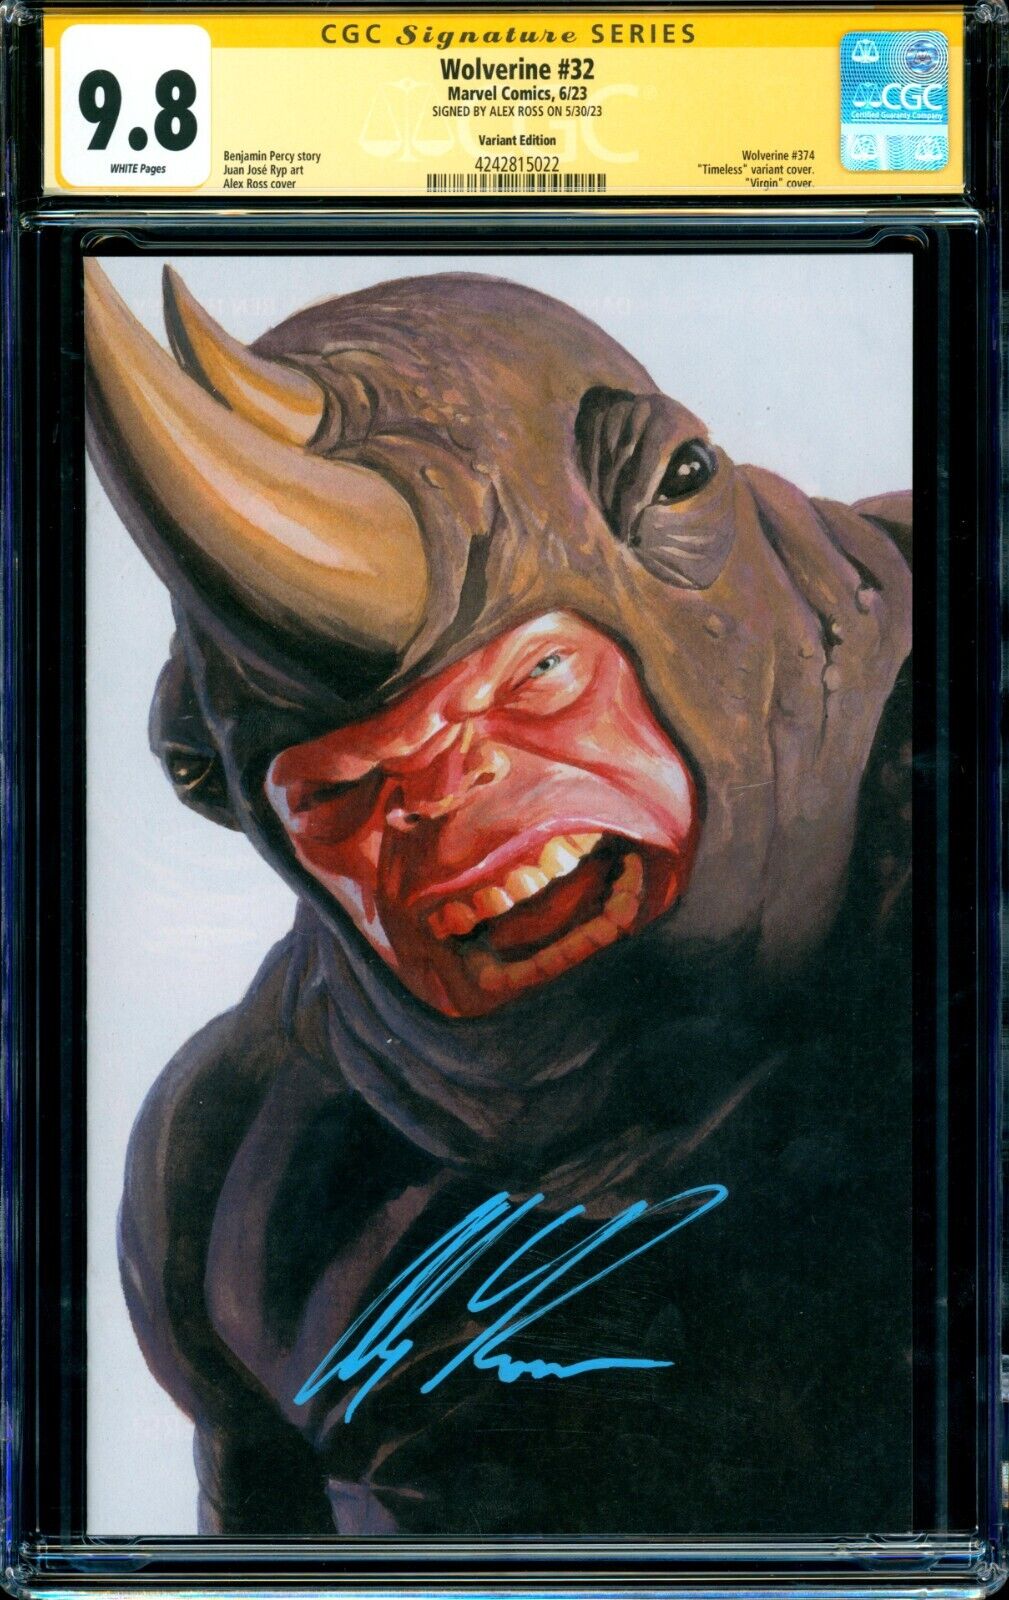 Wolverine 32 RHINO TIMELESS VARIANT CGC SS 98 signed Alex Ross SINISTER SIX